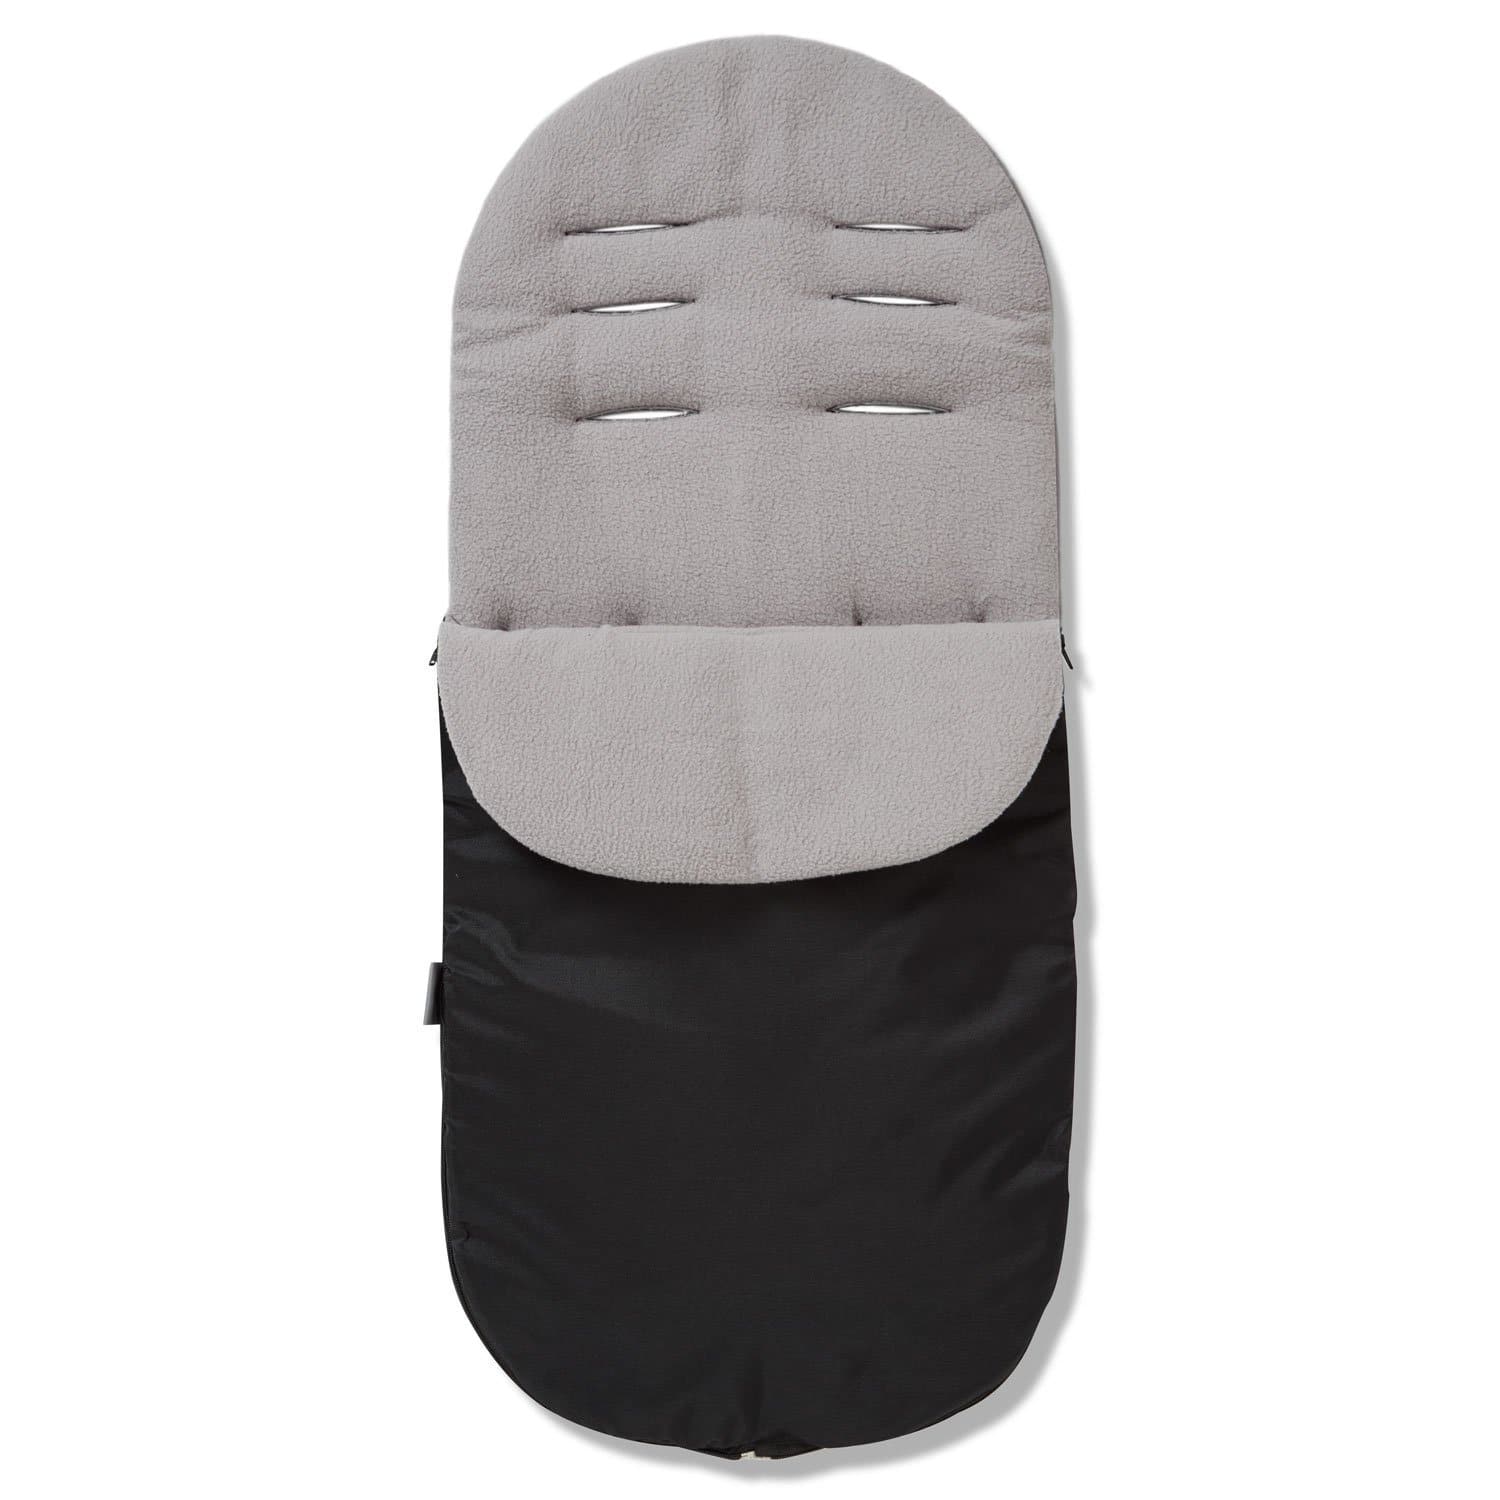 Footmuff / Cosy Toes Compatible with Red Kite - Grey / Fits All Models | For Your Little One